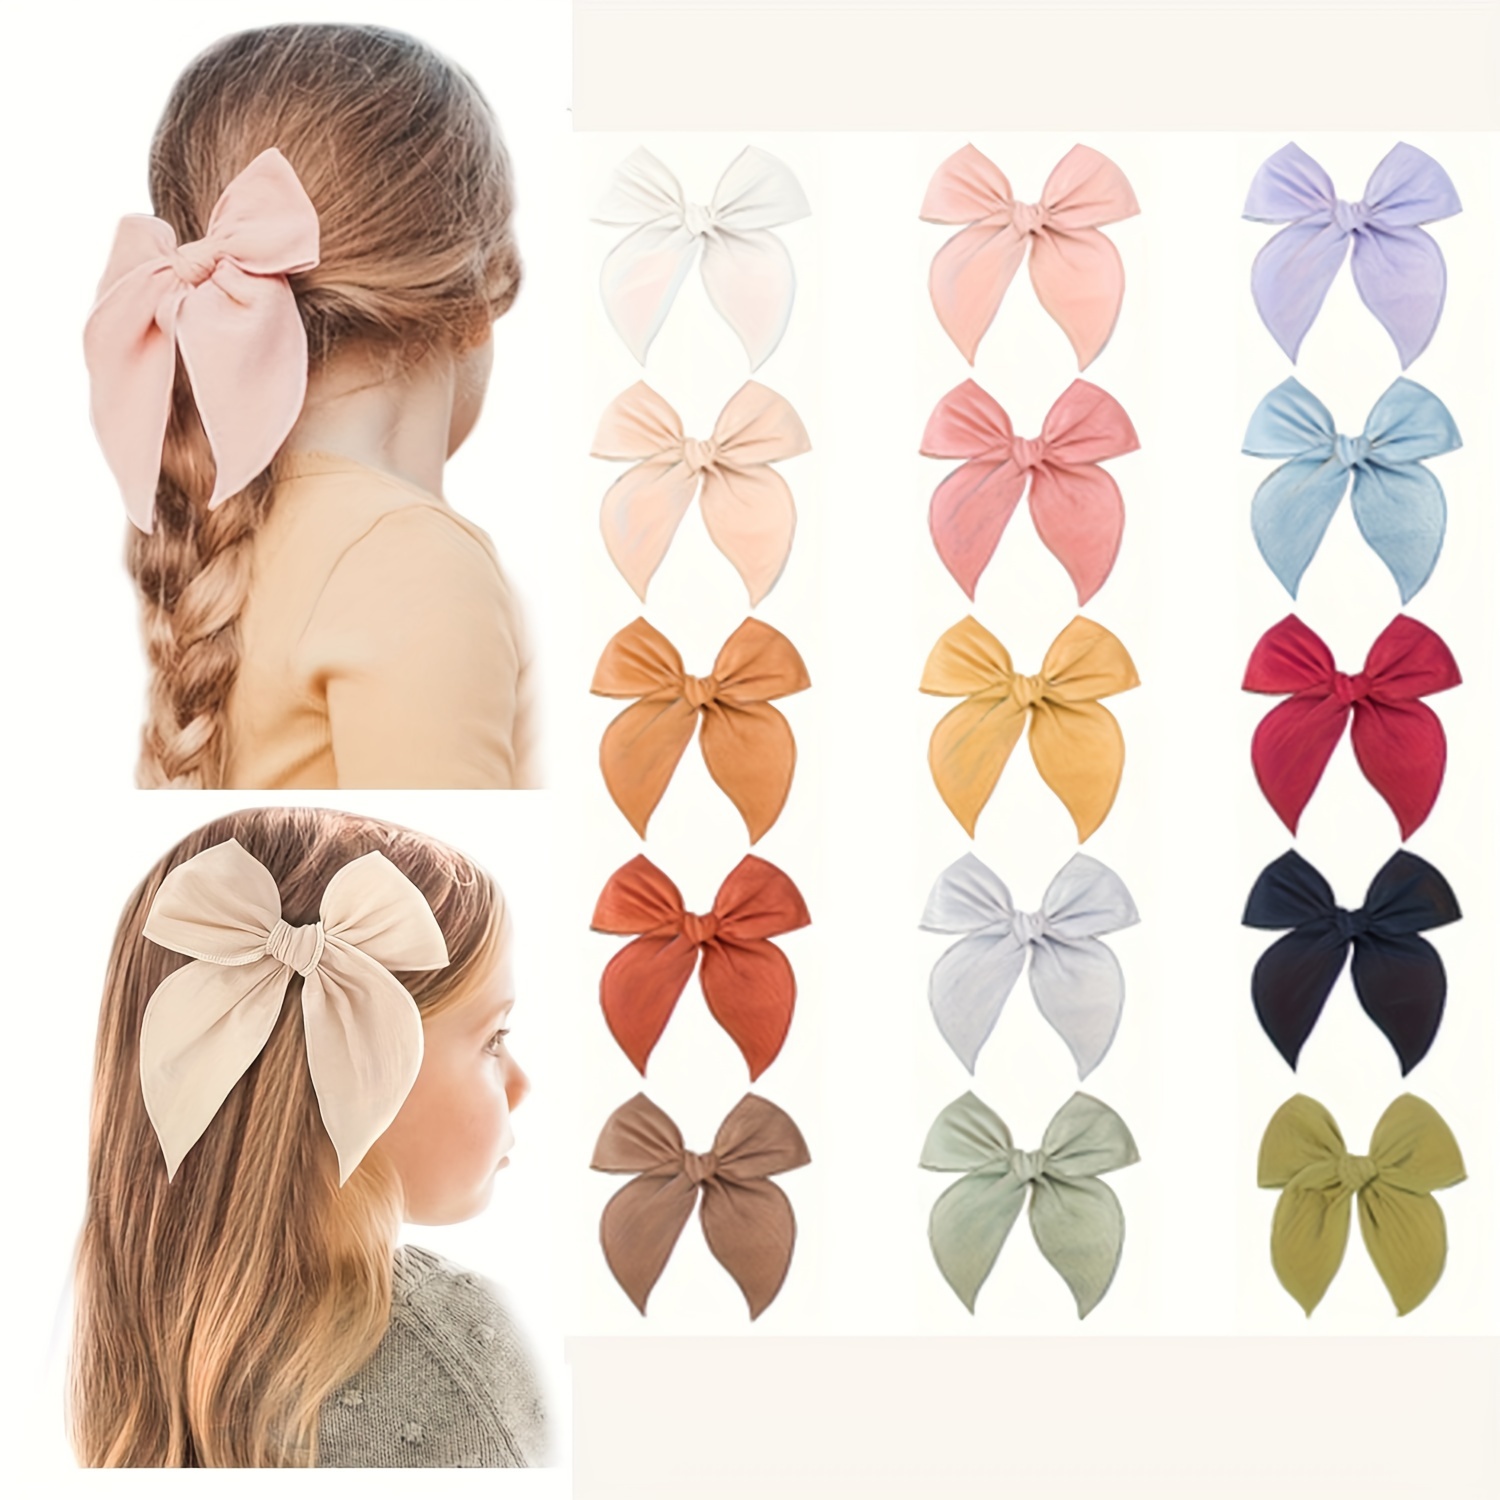 

15pcs Simple Solid Color Bow Hairpins Set Boho Sweet Fabric Large Bowknot Duckbill Clips Handmade Hair Accessories